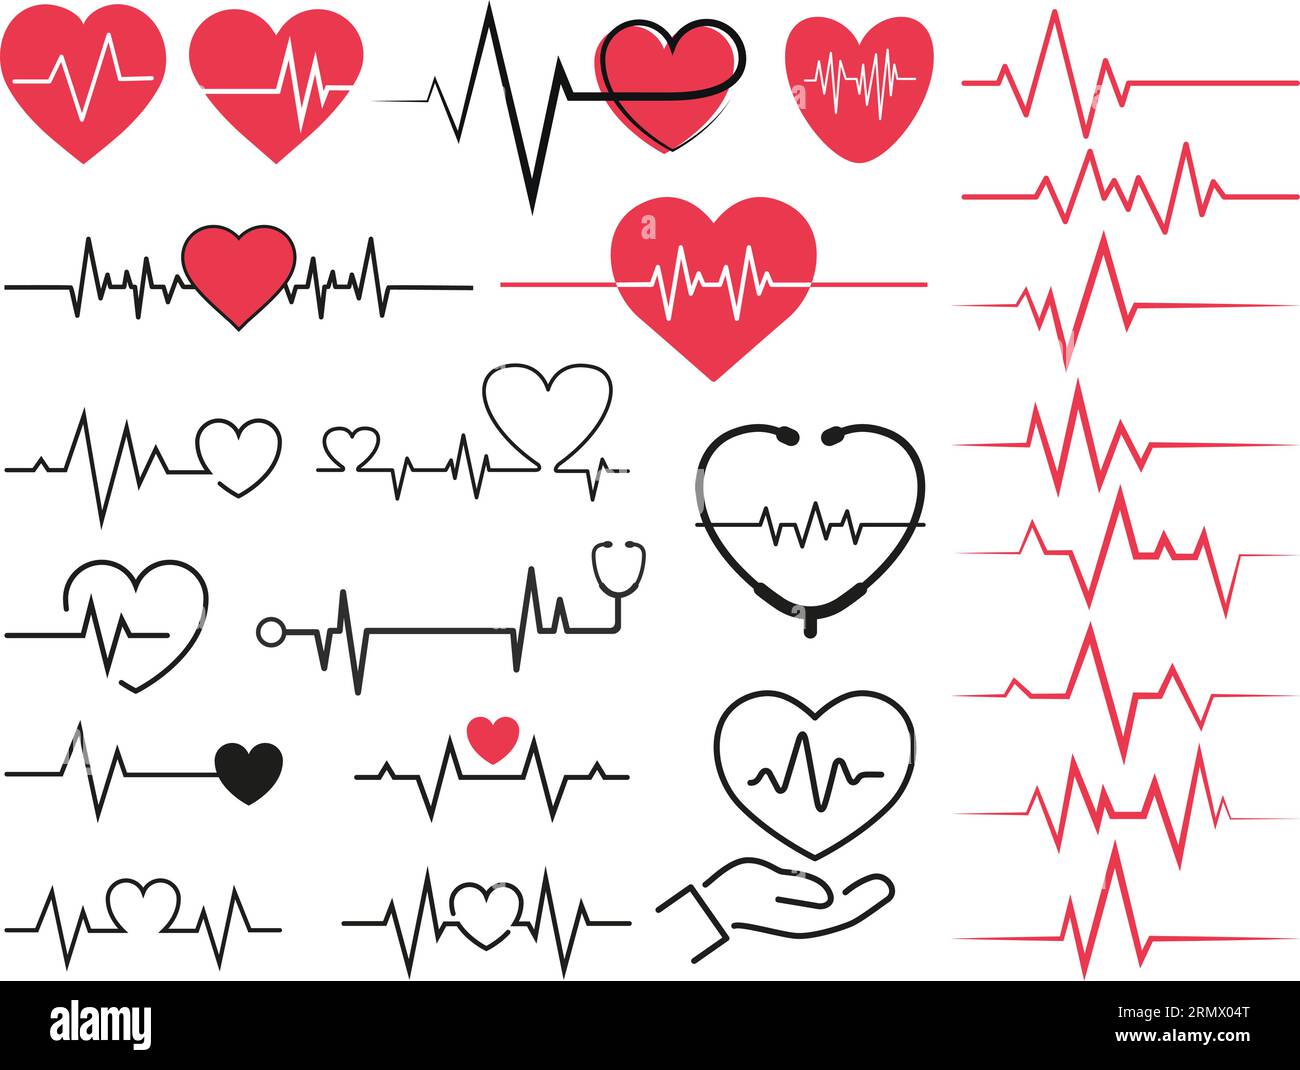 840+ Ekg Strip Stock Photos, Pictures & Royalty-Free Images - iStock